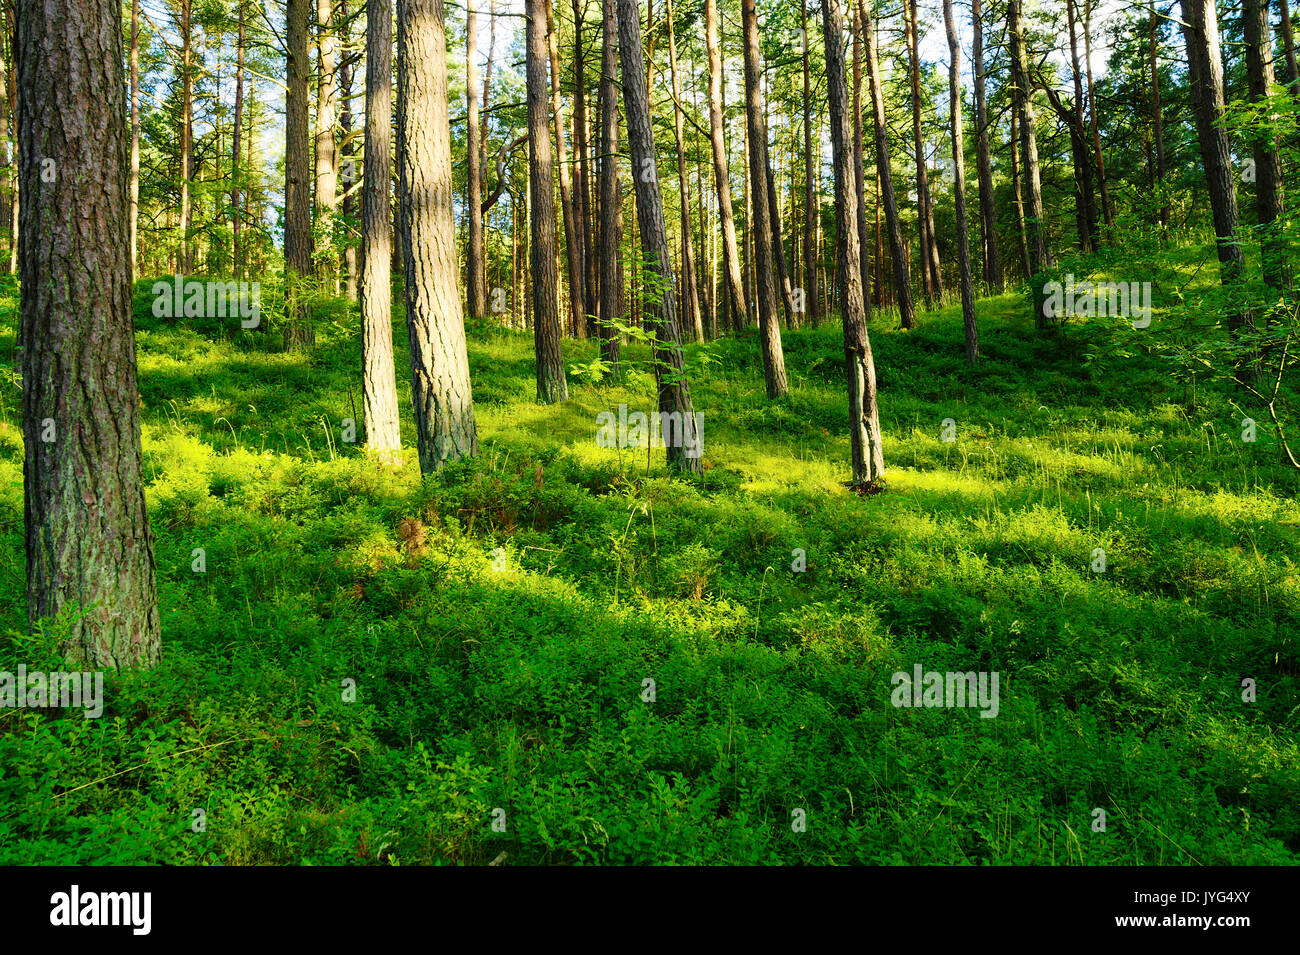 Summer pinewood with bilberry plants growing in forest understory. Scots or Scotch pine Pinus sylvestris trees in evergreen forest. Pomerania, Poland. Stock Photo